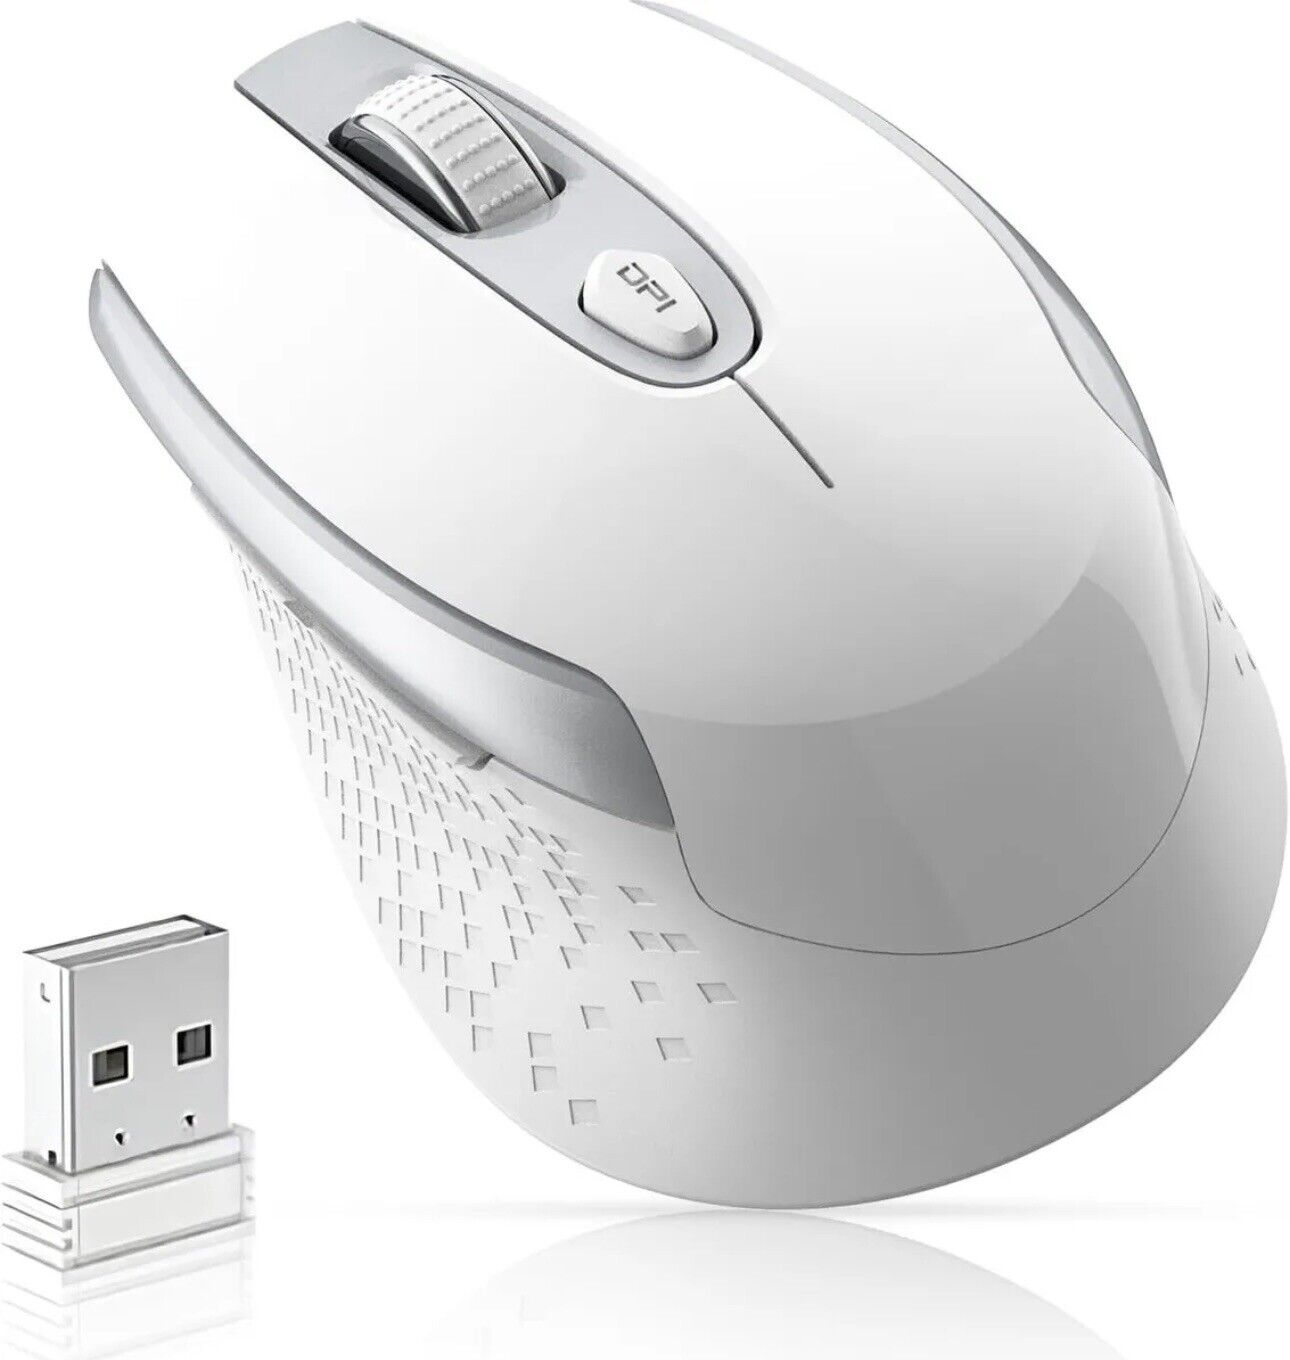 Wireless Computer Mouse,2.4G Ergonomic Optical Mouse,6 Buttons,Silent Mouse